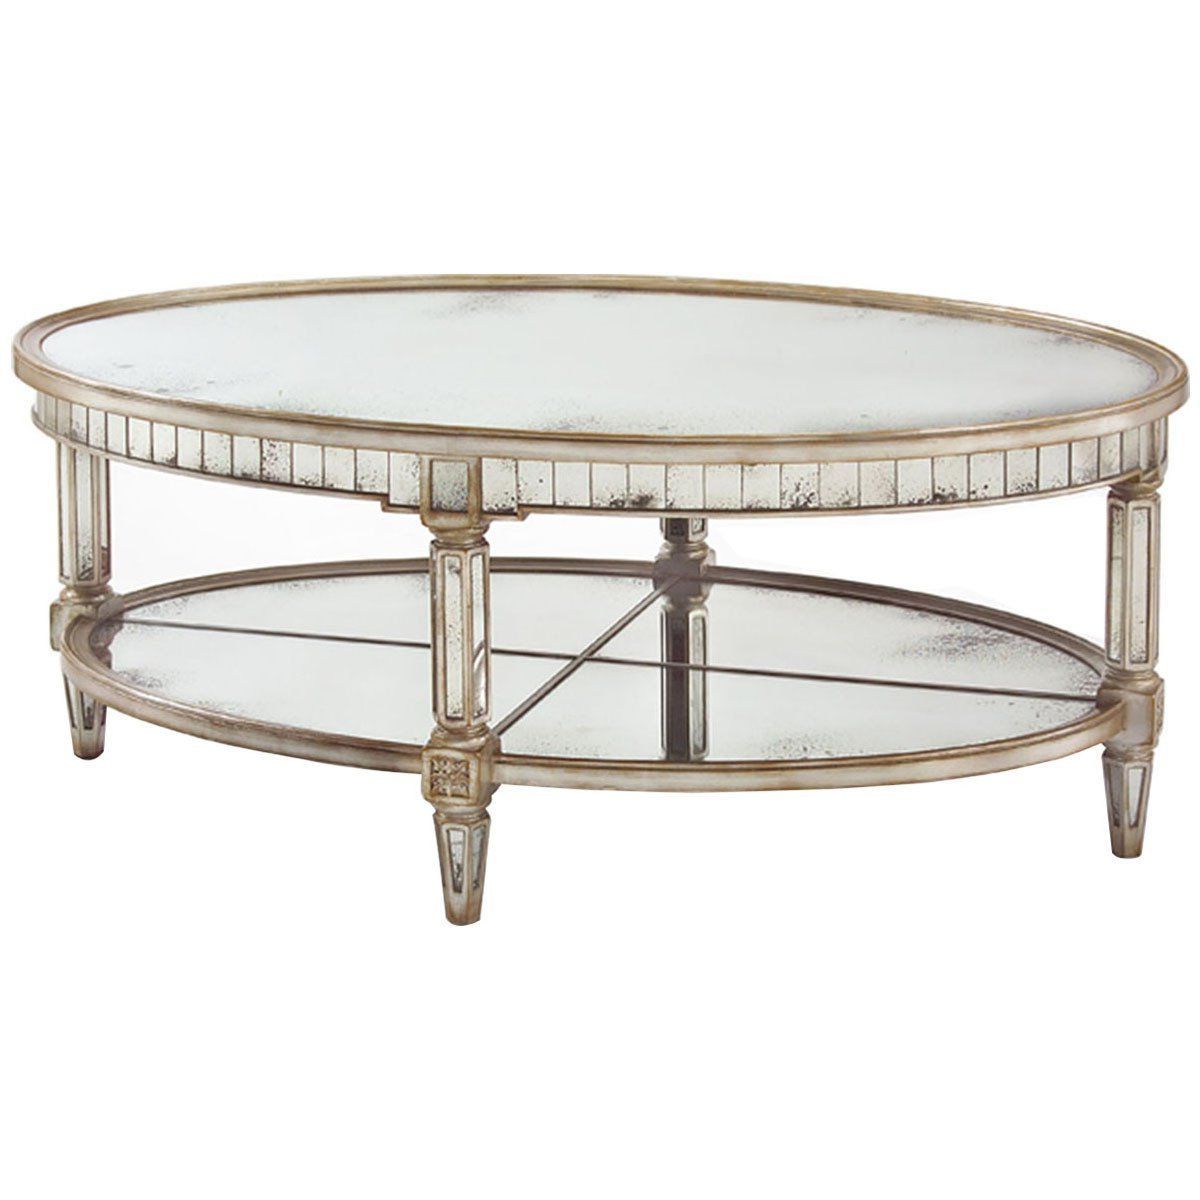 John Richard Parisian Silver Keswick Oval Cocktail Table Regarding Well Known Silver Mirror And Chrome Coffee Tables (View 19 of 20)